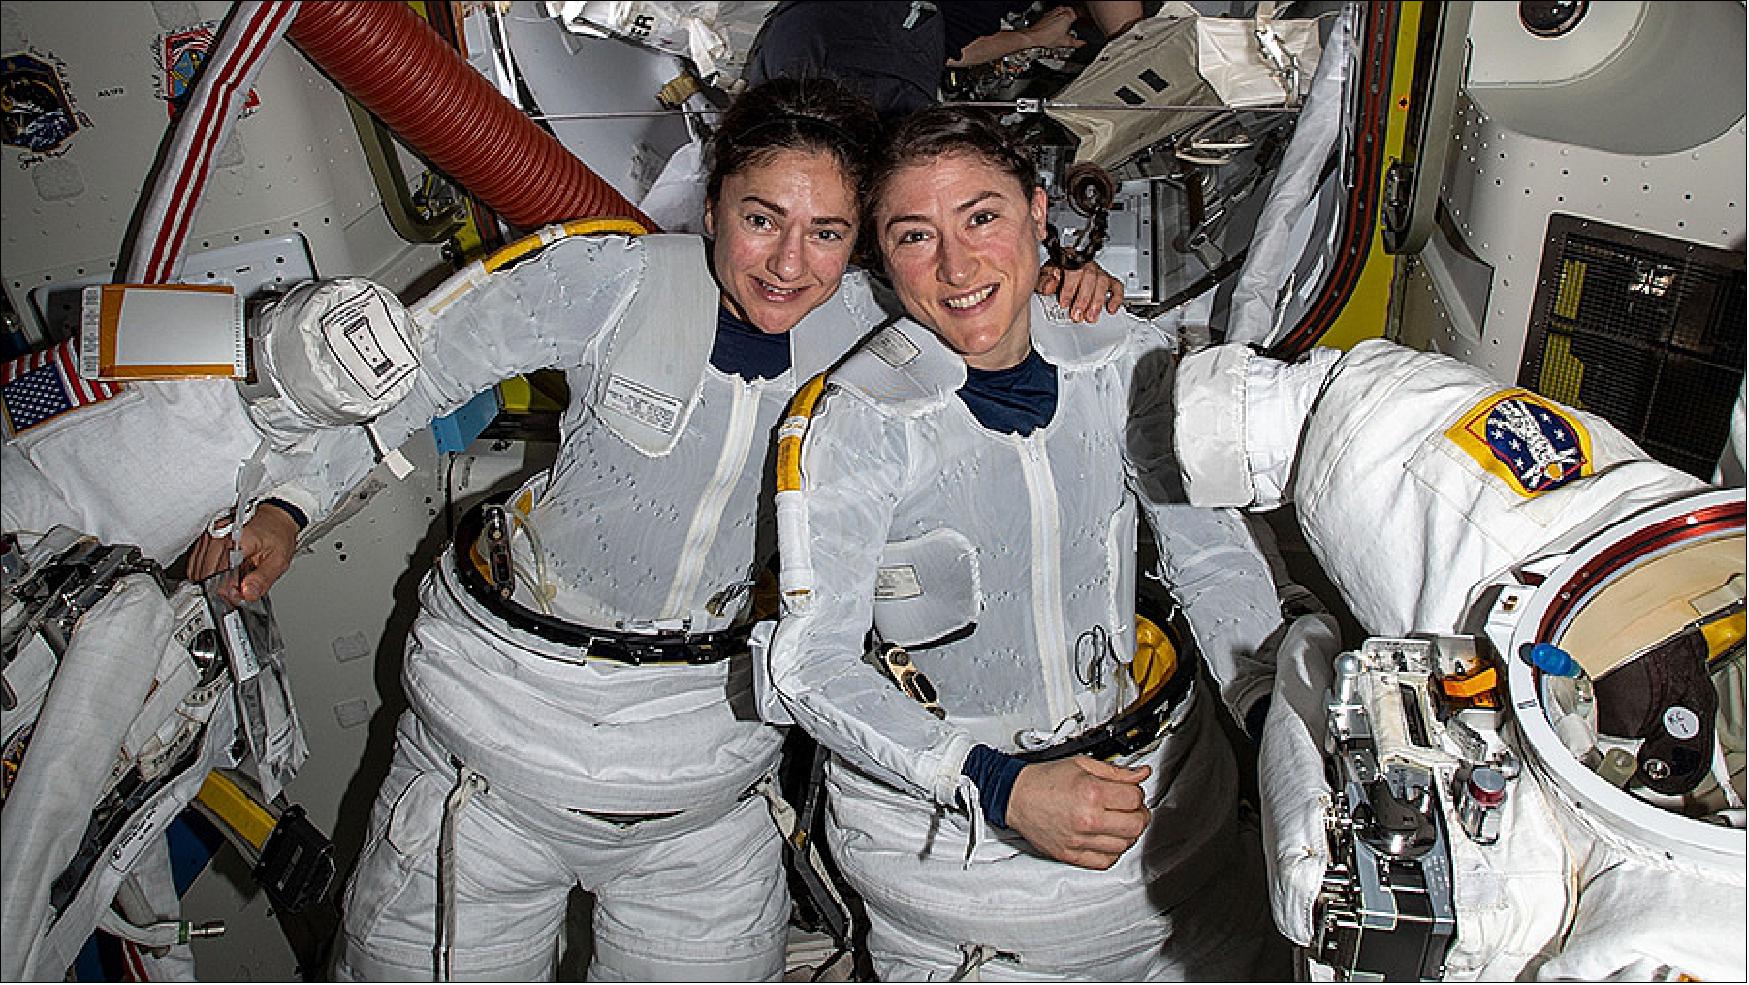 Figure 126: NASA astronauts Jessica Meir (left) and Christina Koch are pictured preparing to begin the historic first-ever all-female spacewalk on Oct. 18, 2019 (image credit: NASA)